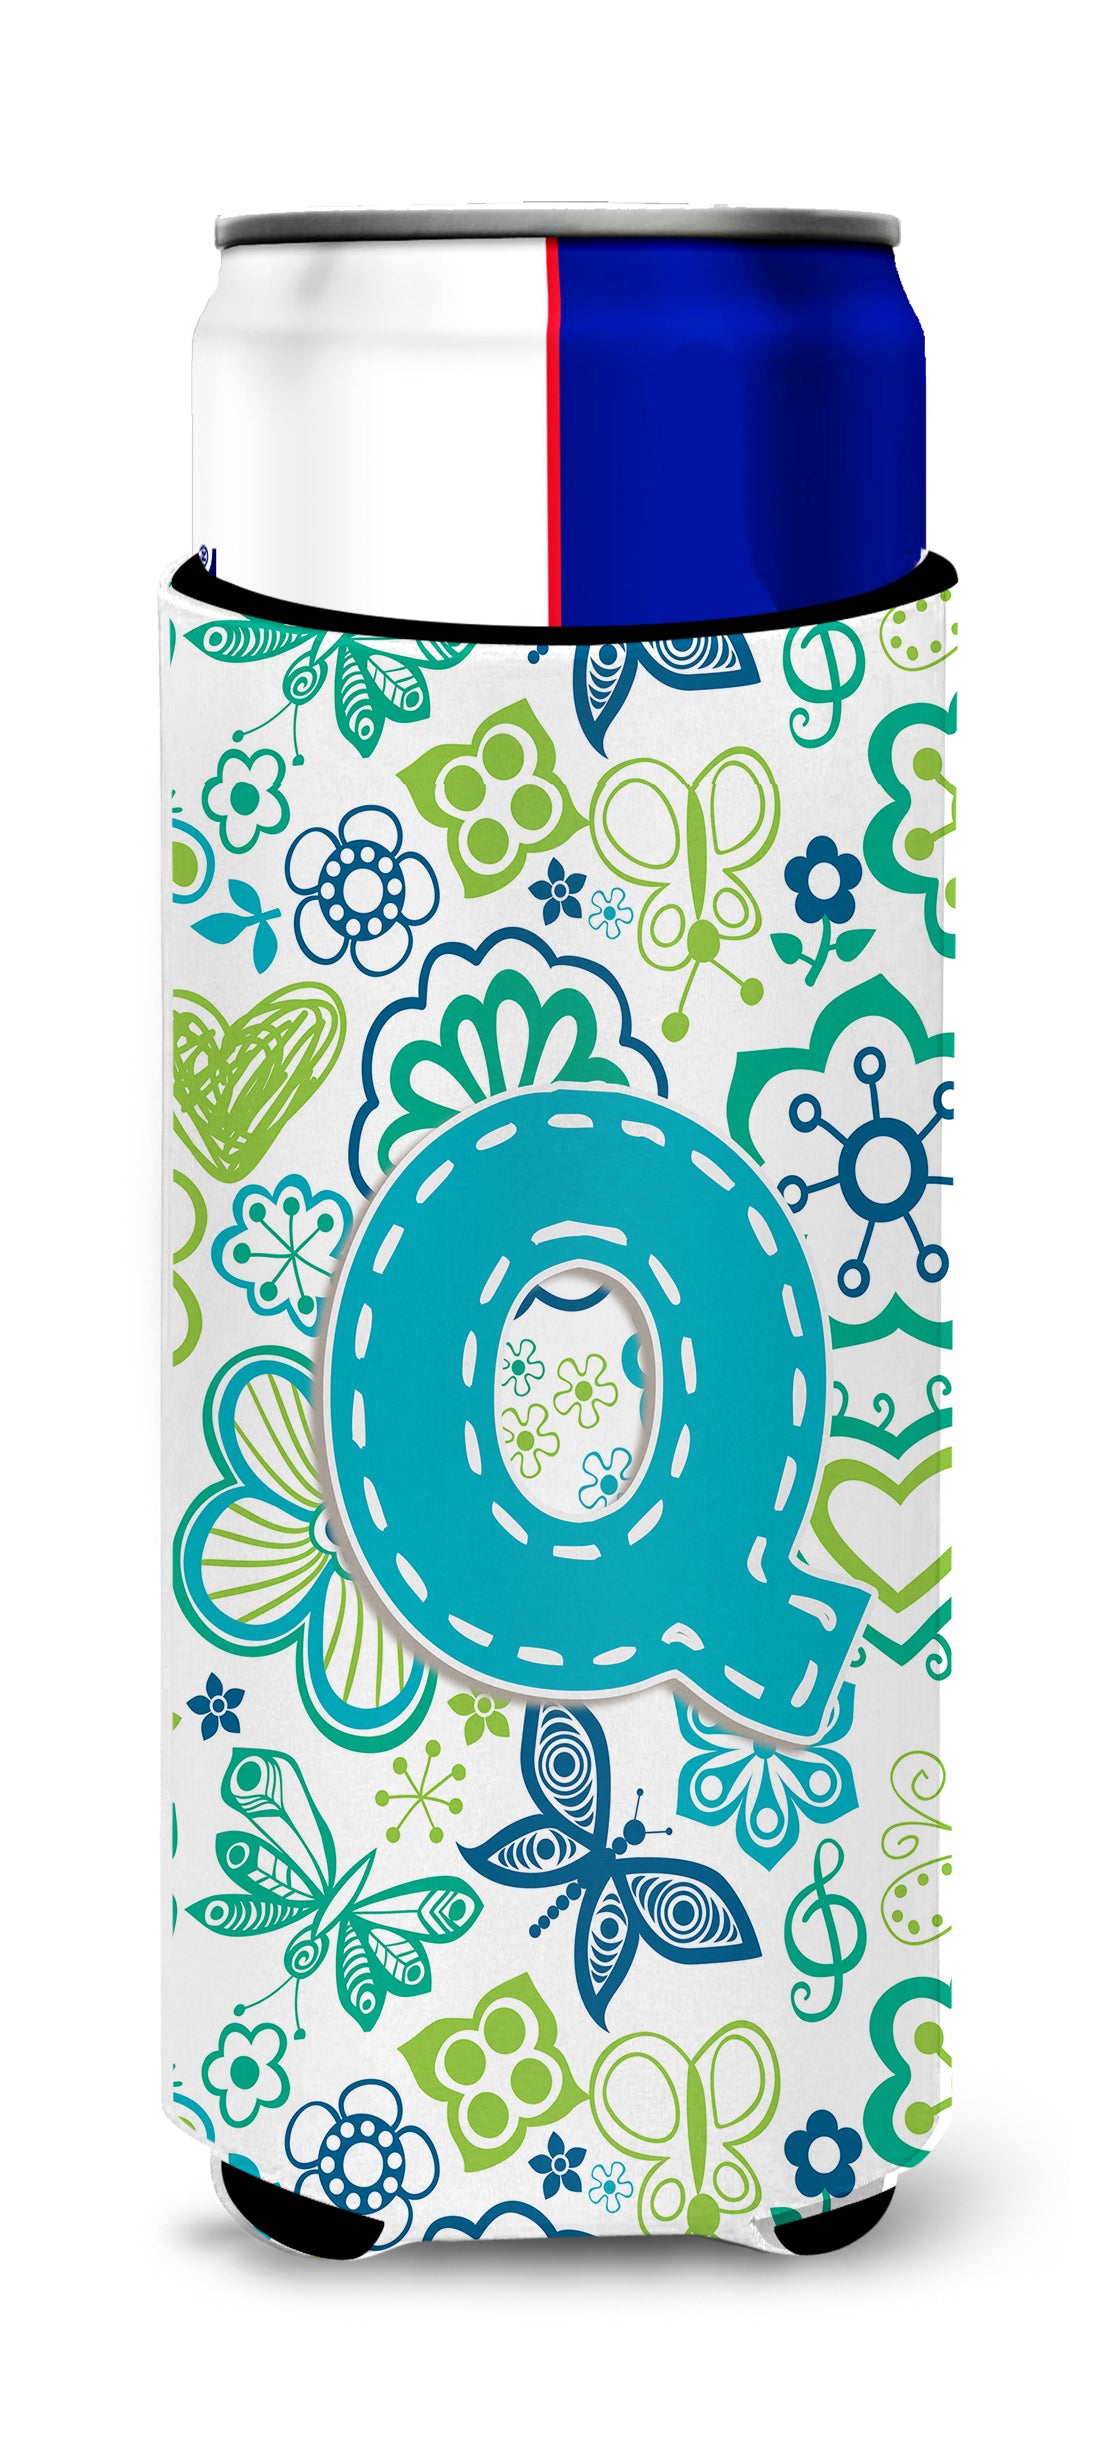 Letter Q Flowers and Butterflies Teal Blue Ultra Beverage Insulators for slim cans CJ2006-QMUK